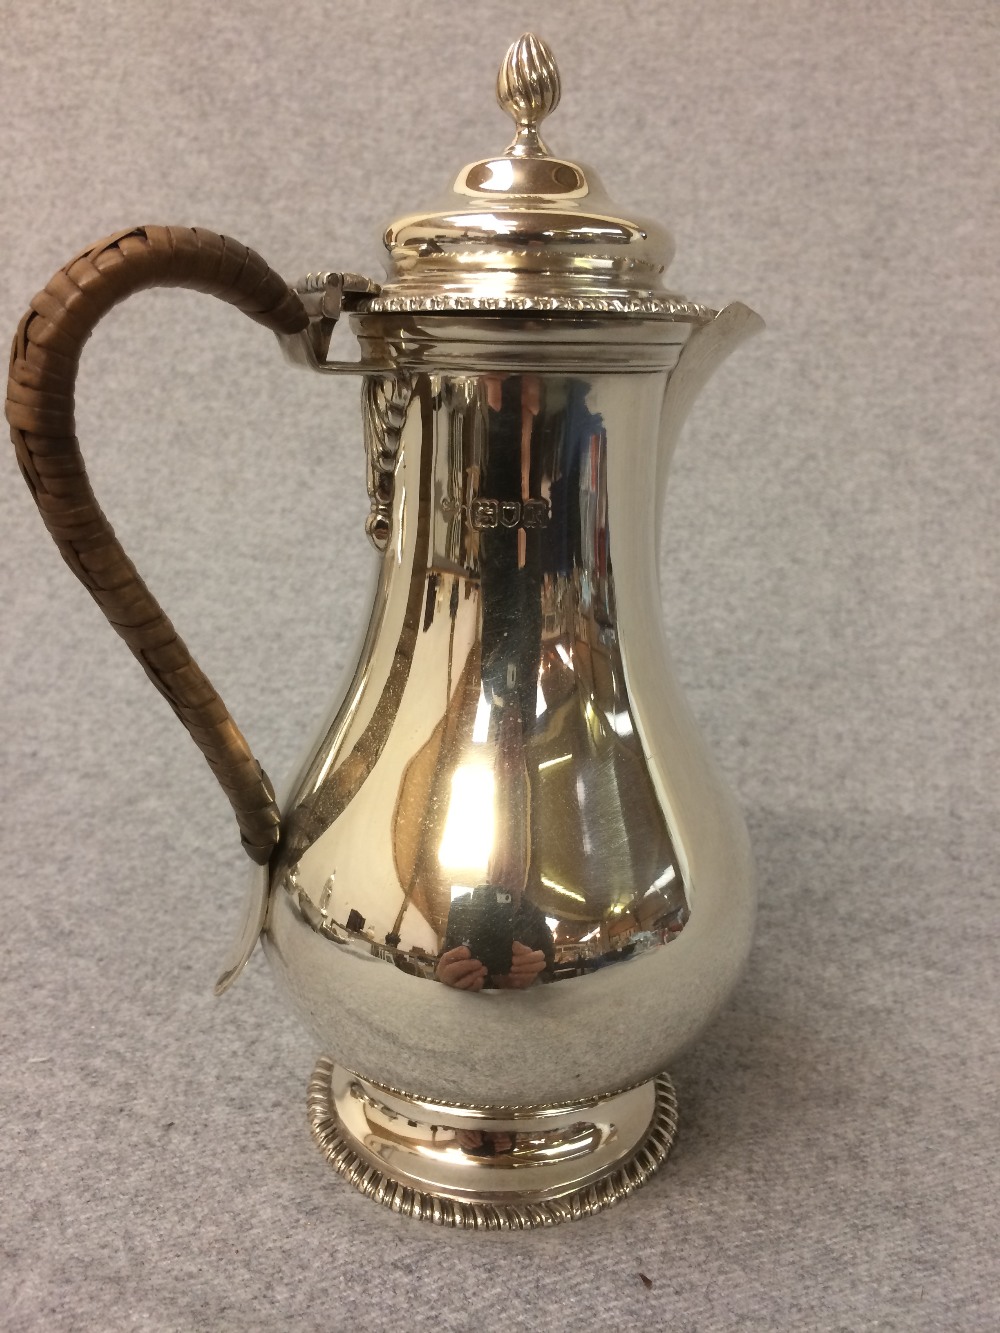 Hallmarked silver hot water jug with cane handle, London 1905, 14.5 ozt